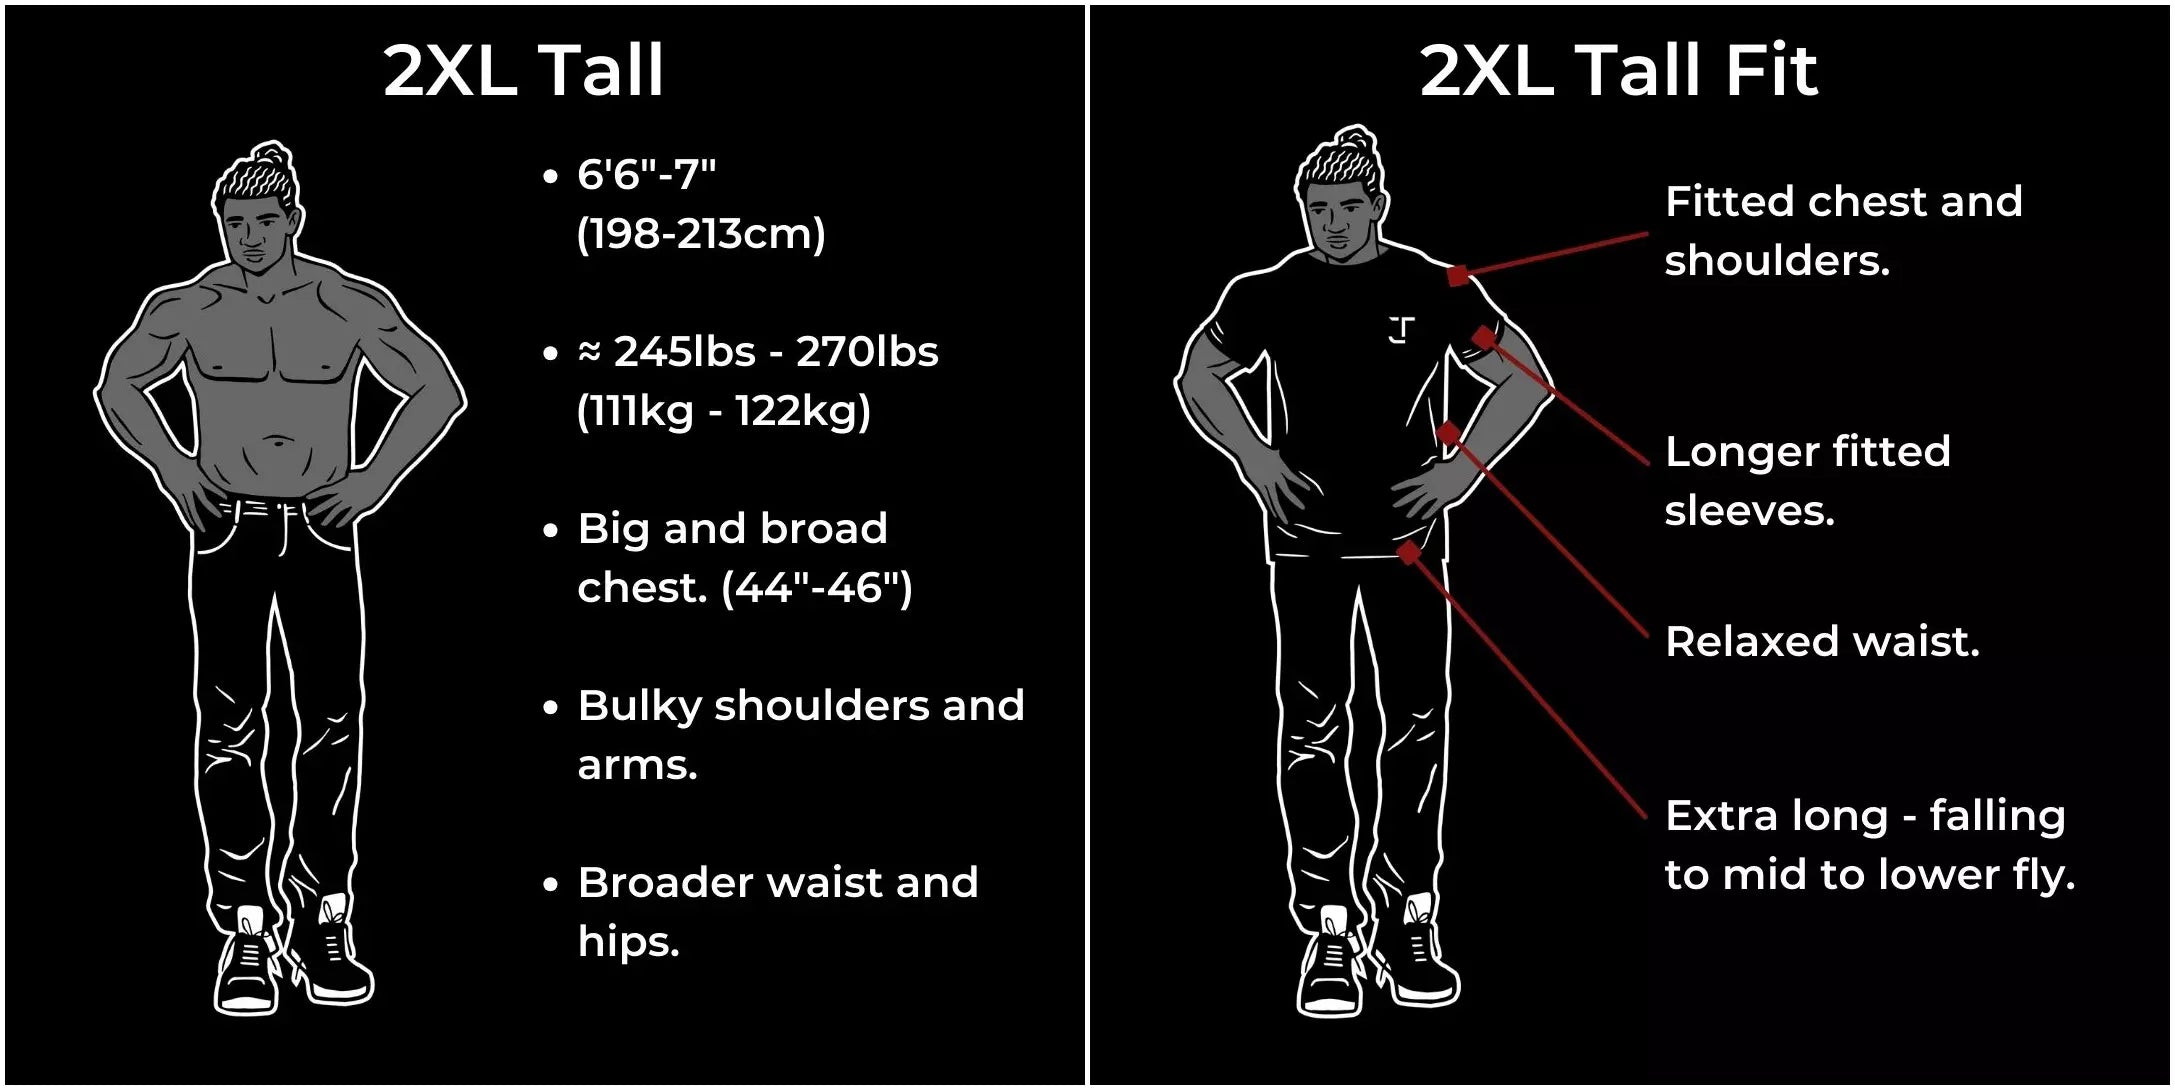 2XL tall for tall and broad guys 245-270lbs and 6'6